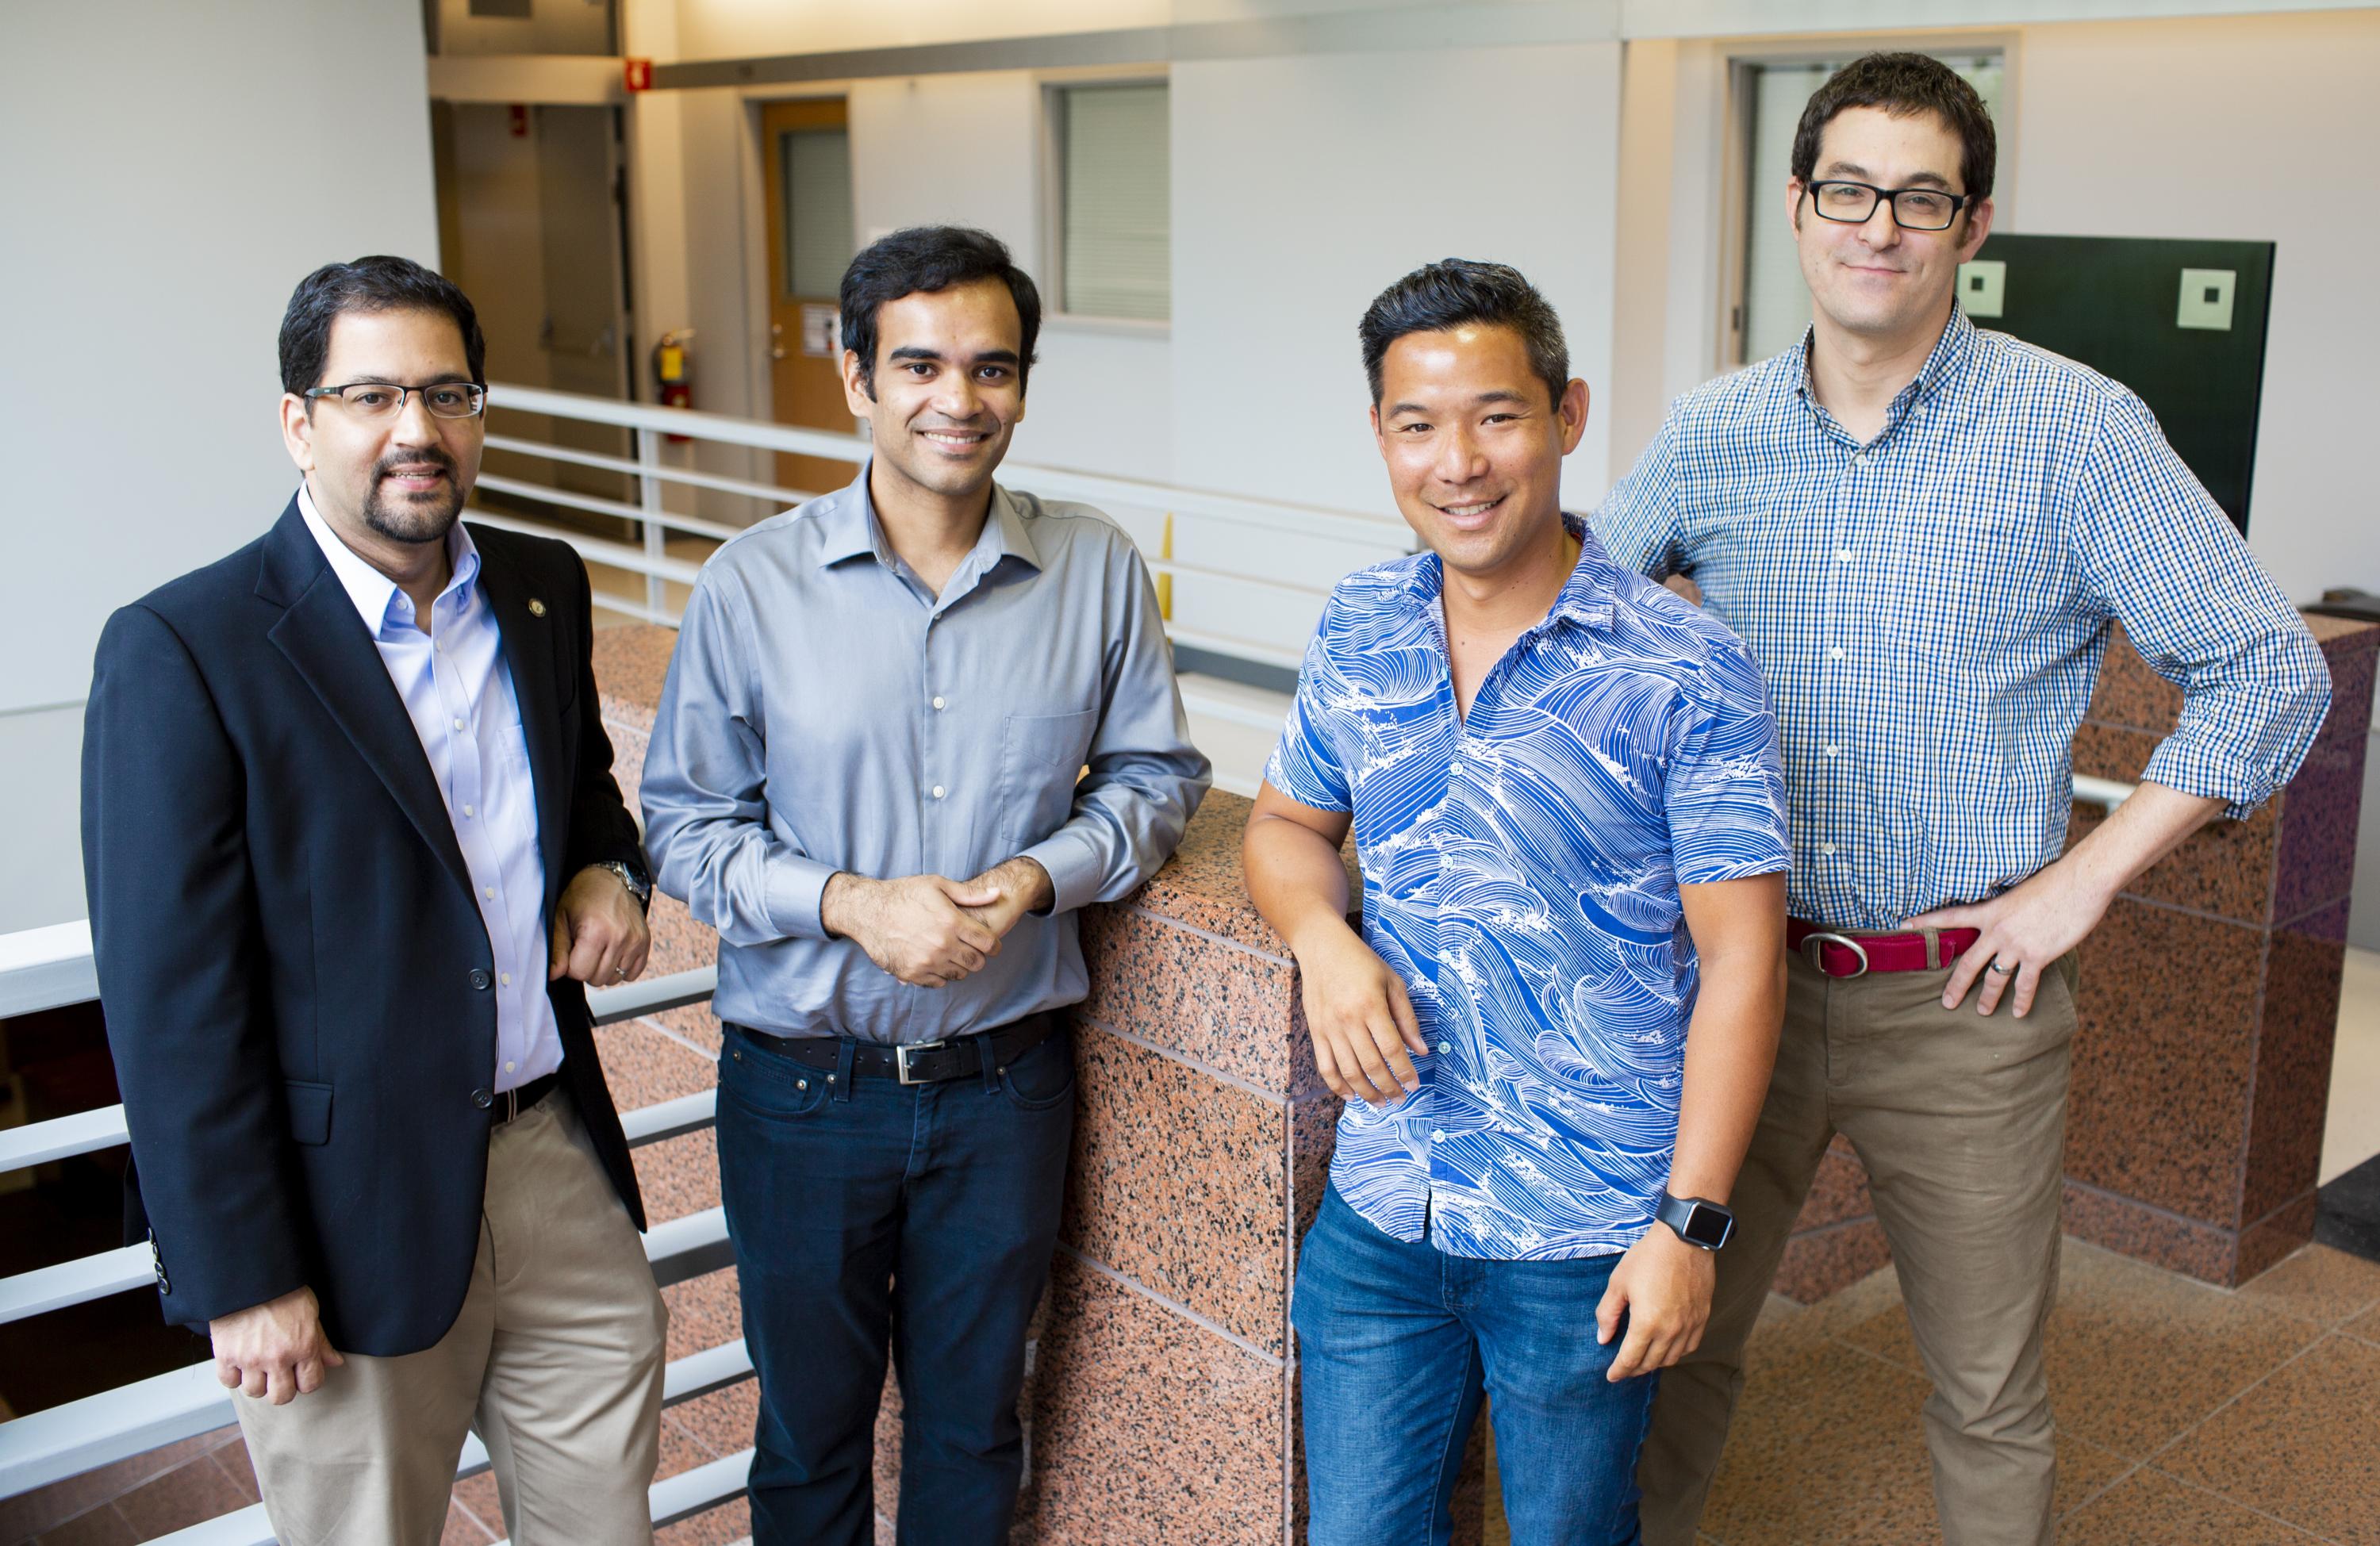 Muhannad Bakir (far left) and Emory's Samuel Sober (far right) combined forces for the project. The work will be led by post-doctoral fellows in their labs, Georgia Tech's Muneeb Zia (center left) and Emory's Bryce Chung (center right).